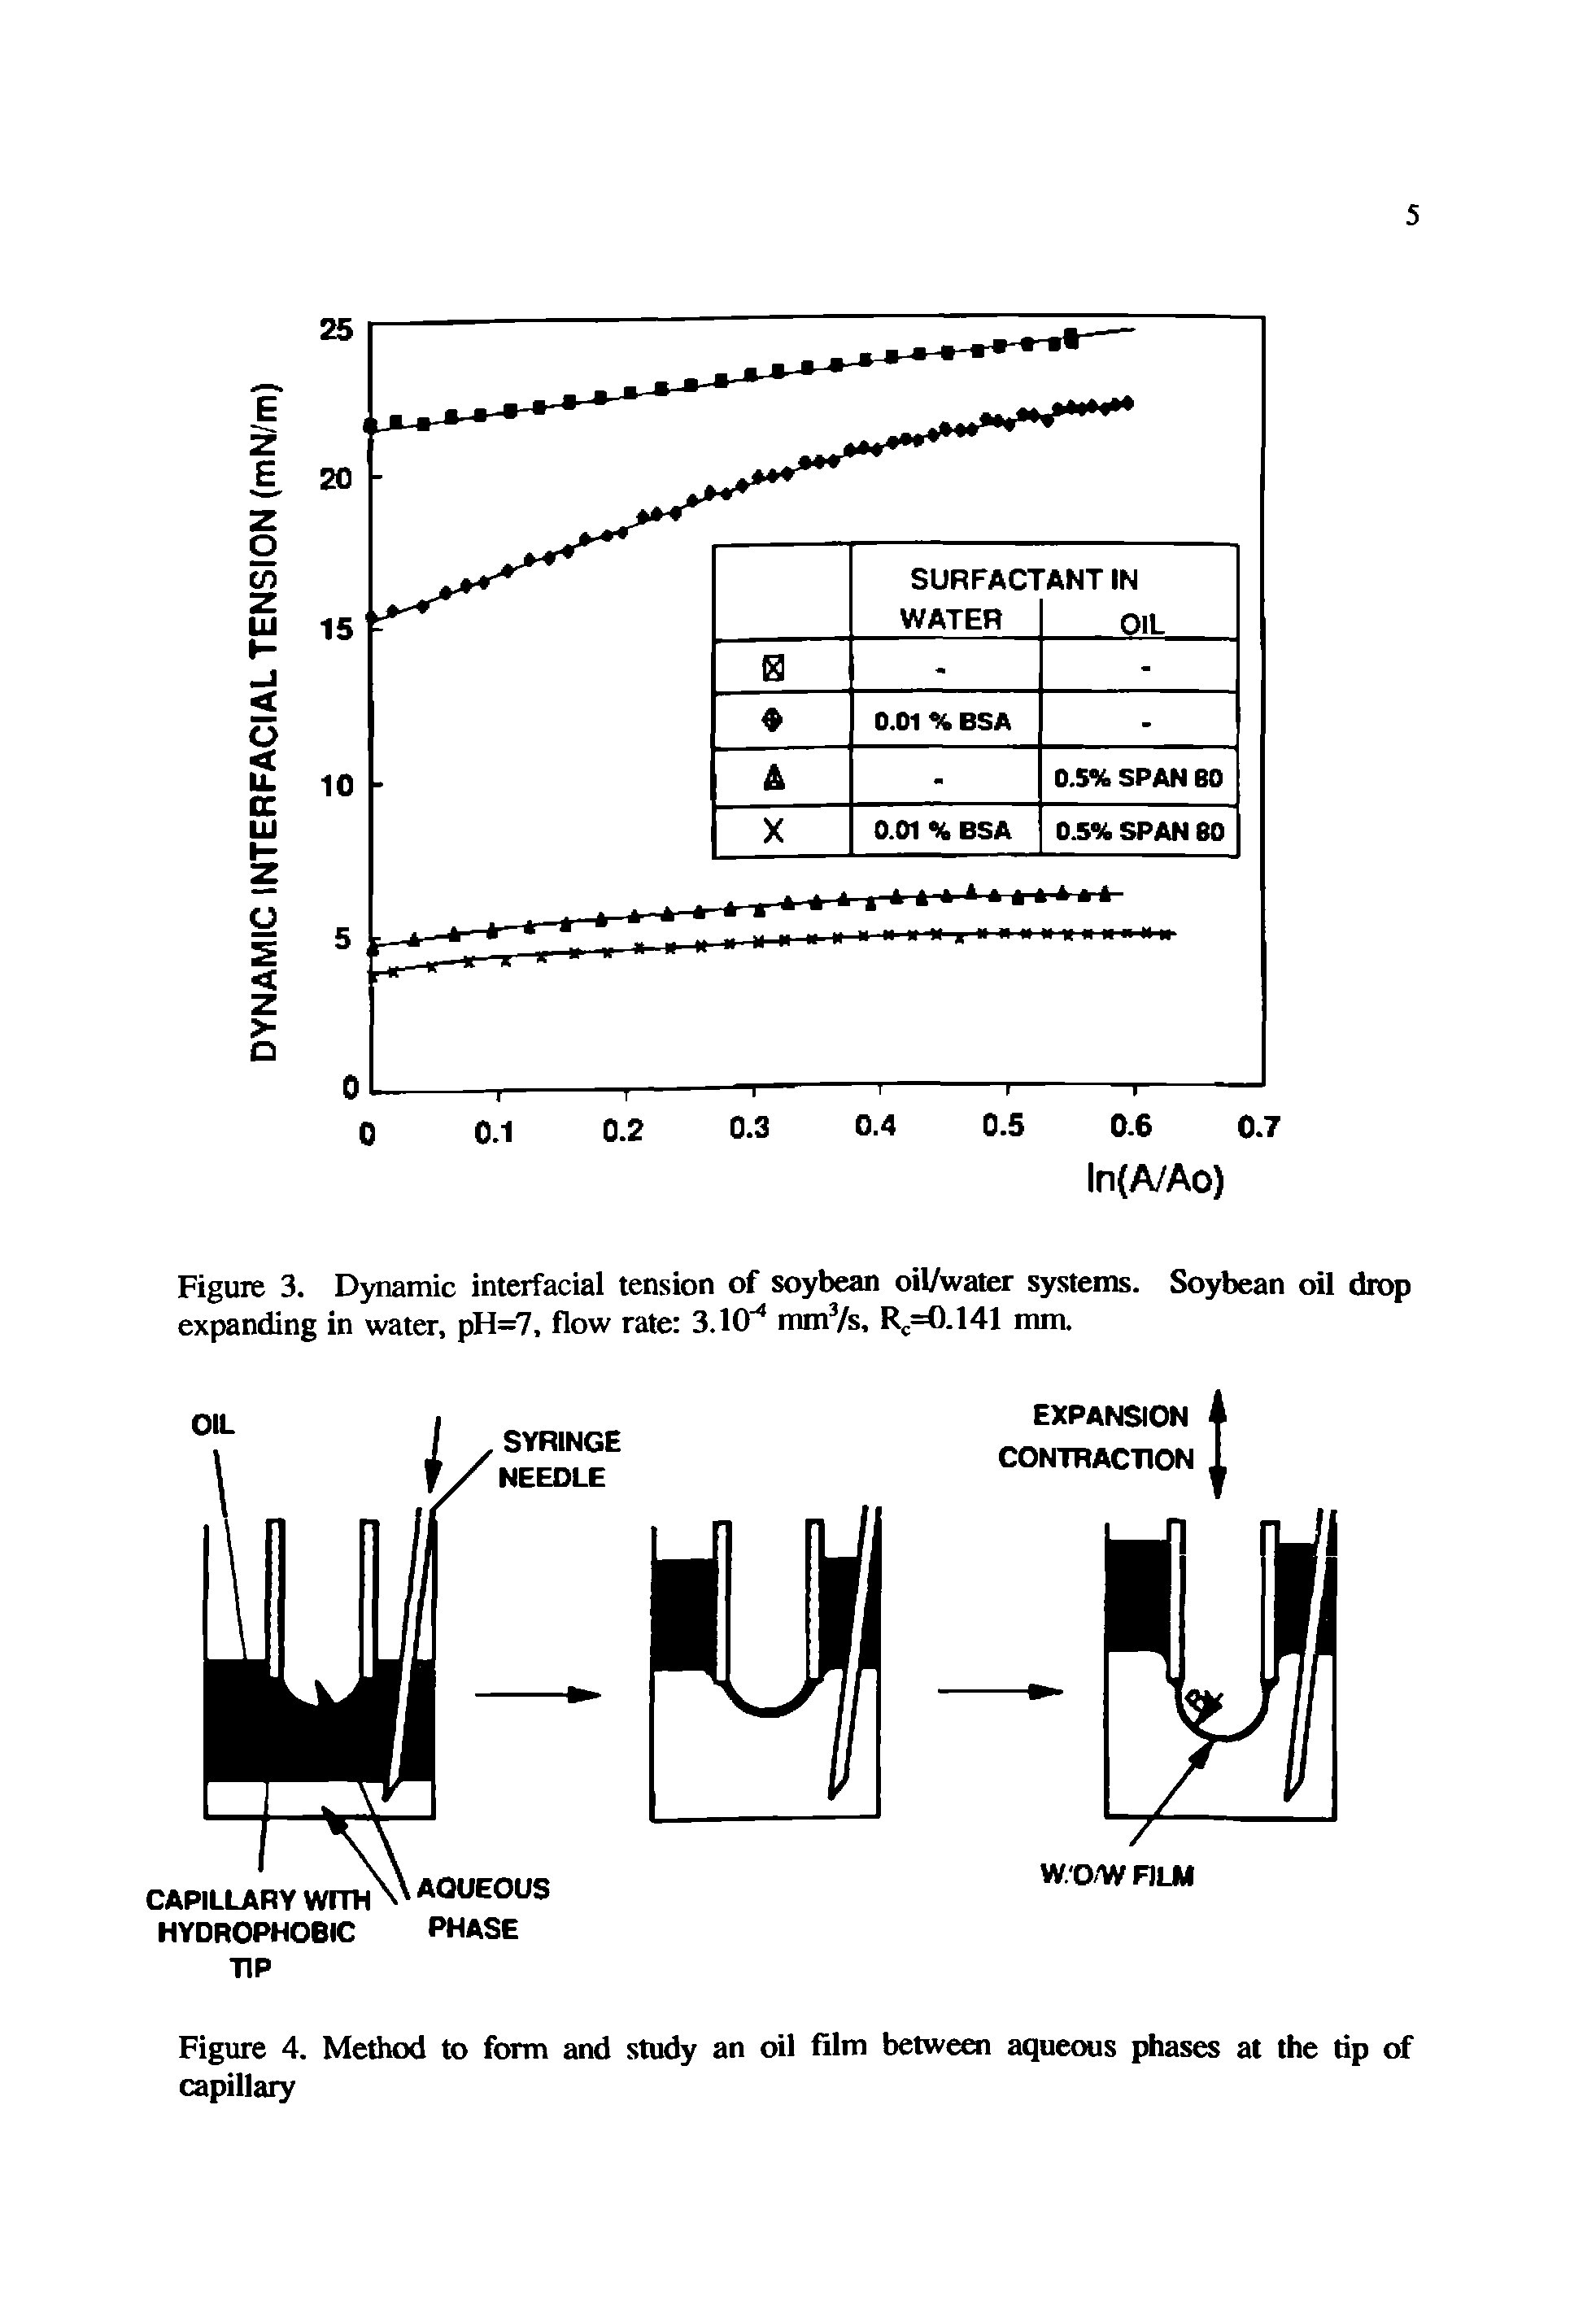 Figure 3. Dynamic interfacial tension of soybean oil/water systems. Soybean oil drop expanding in water, pH=7, flow rate 3.10"4 mm3/s, Rc=0.141 mm.